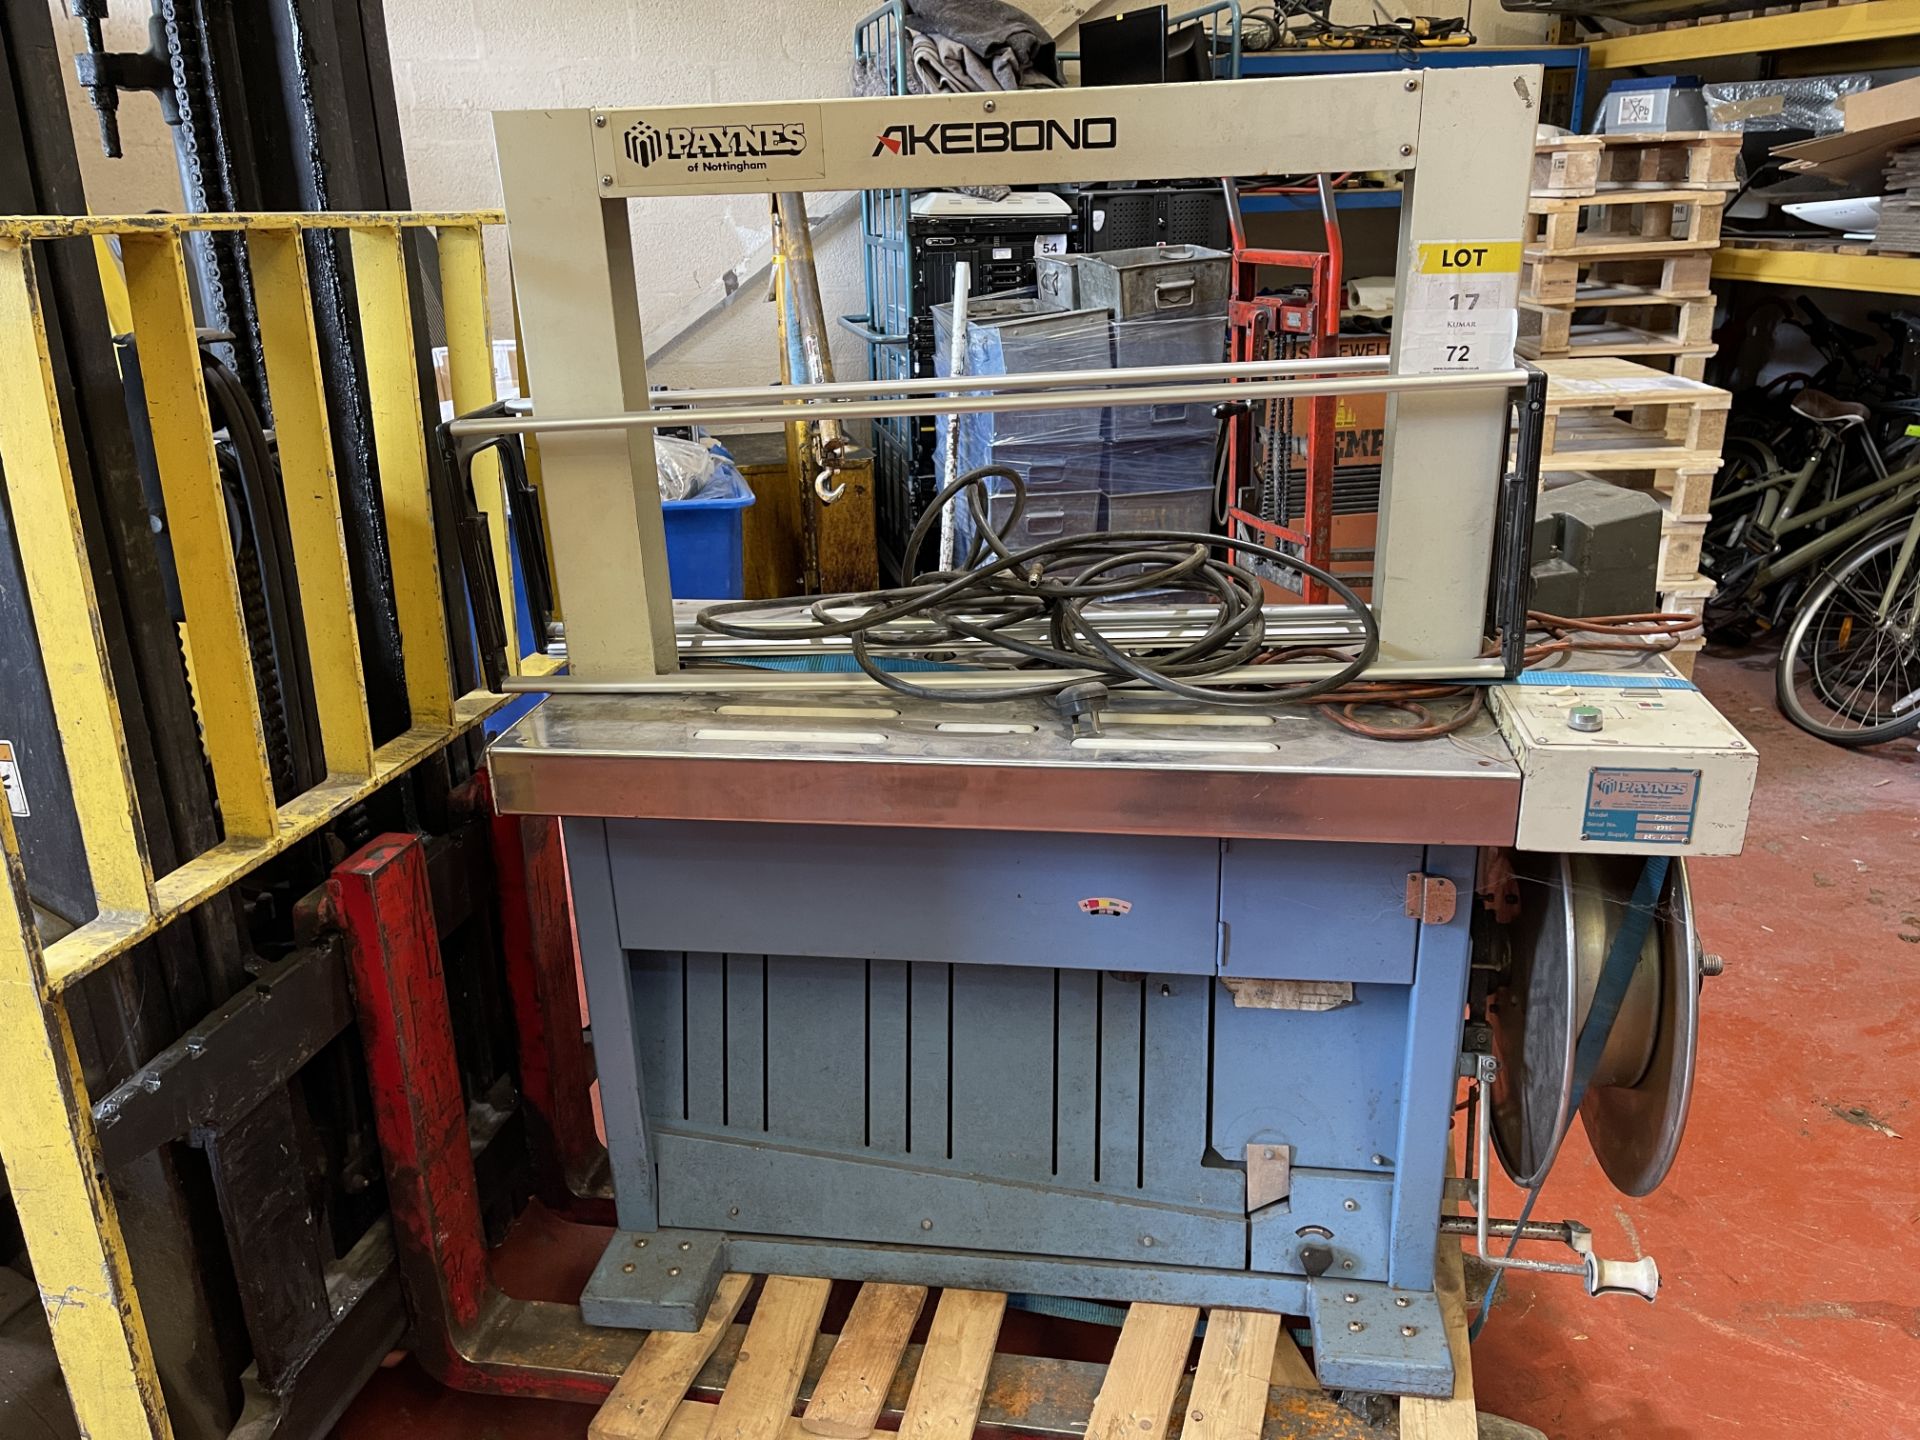 StraPack Akebono Automatic Banding Machine. Located at Unit 1 Walsall WS2 8AU. Collection to be